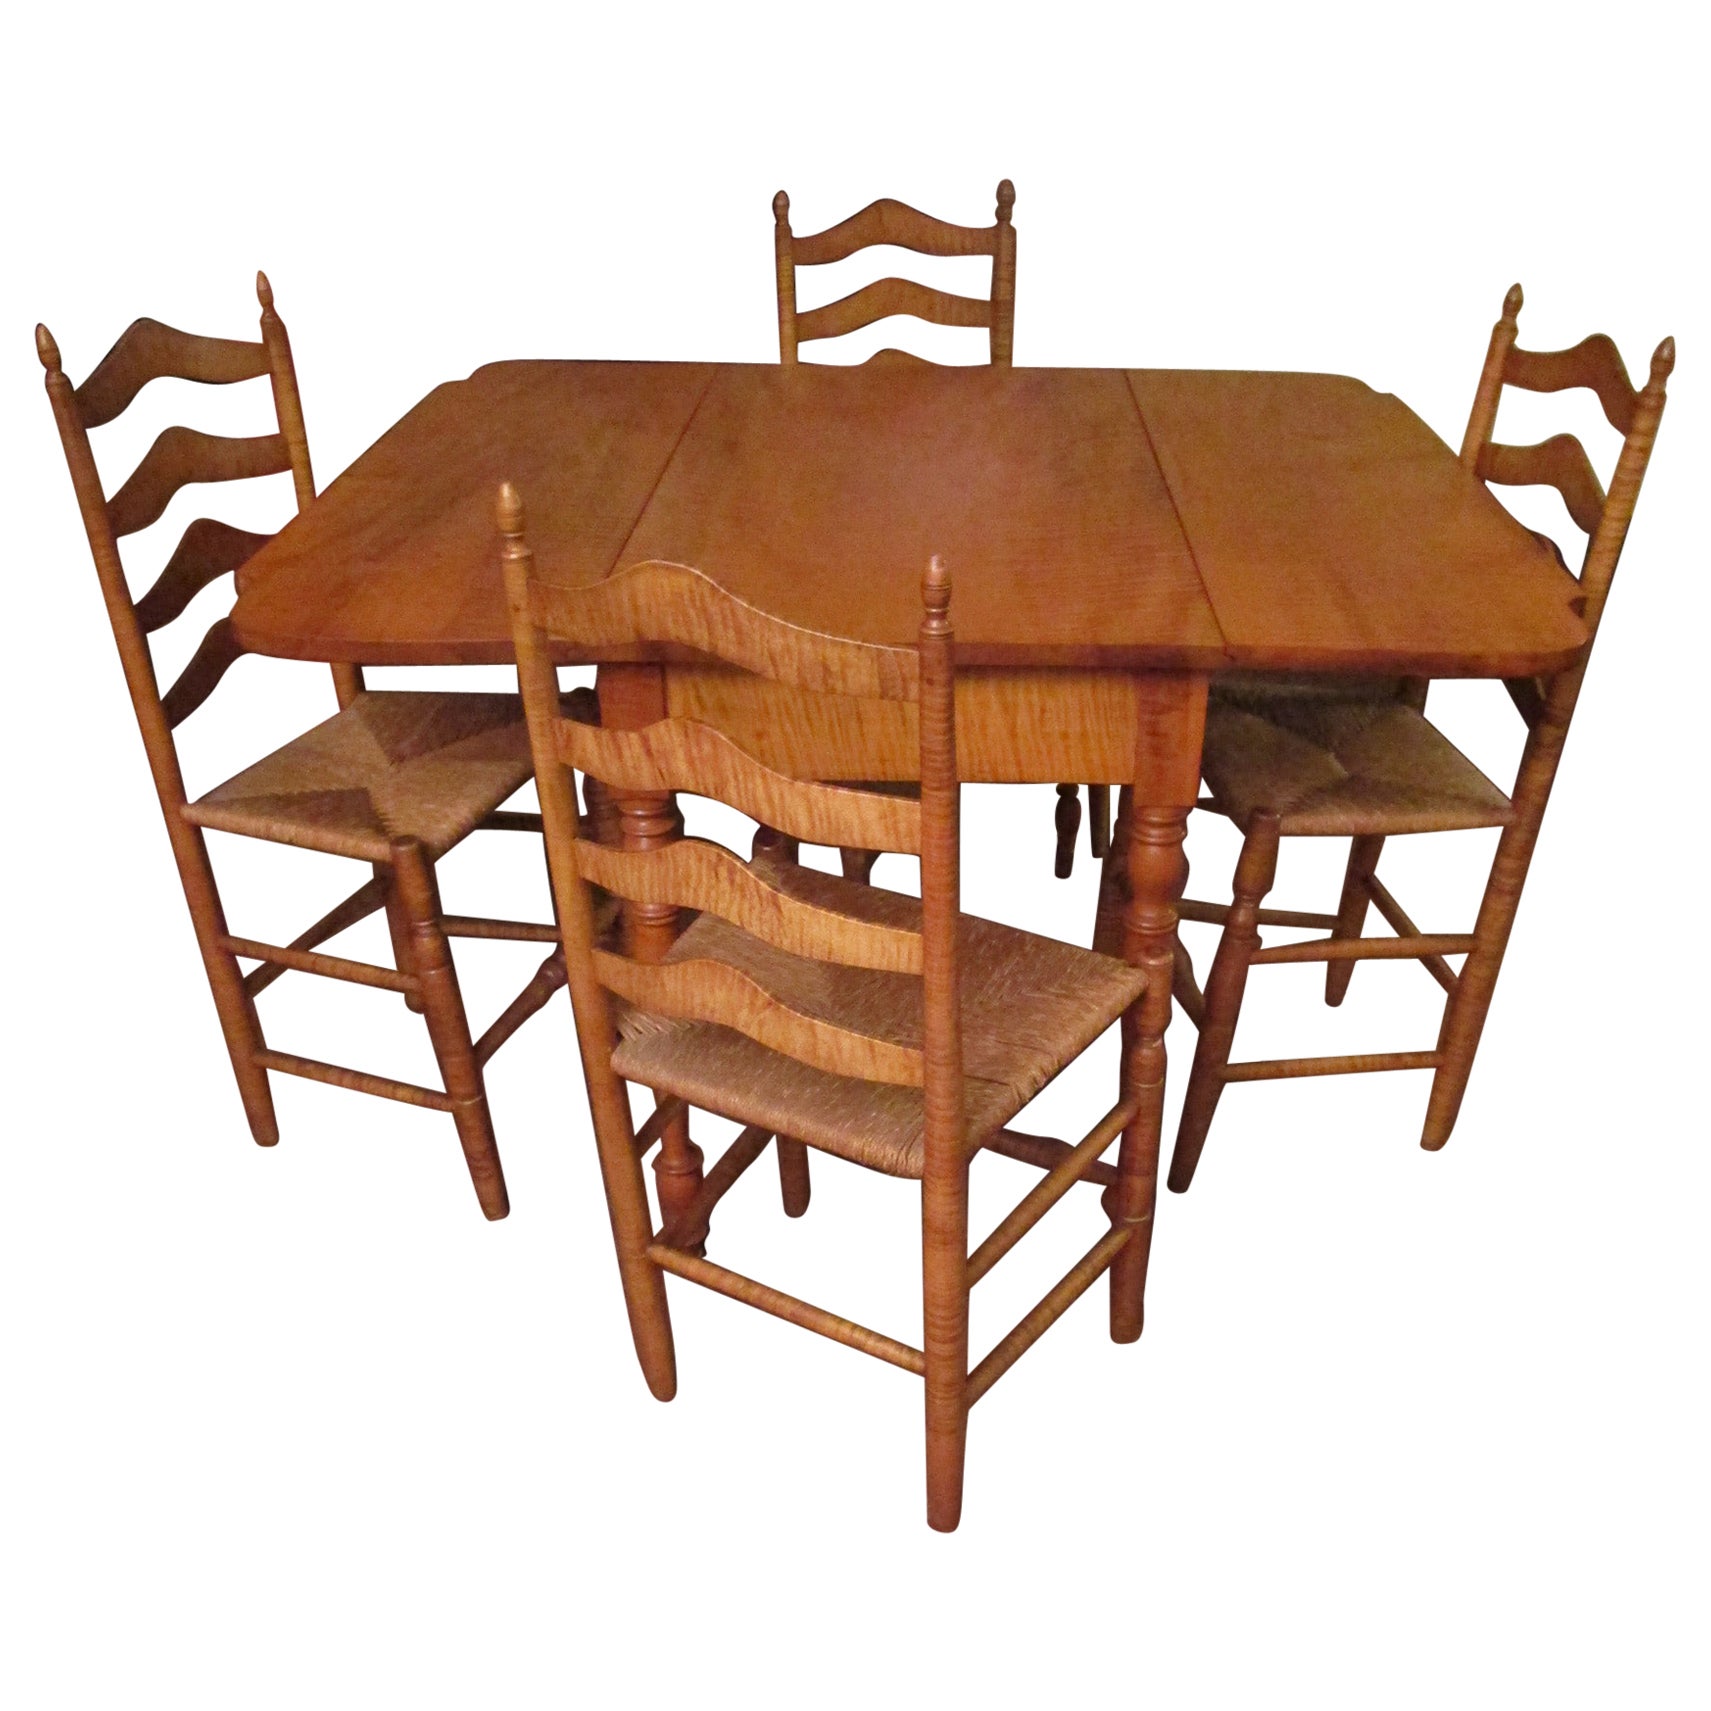  Dining Table and Four Chairs w/ Rush Seats Early 19thc American Tiger Maple